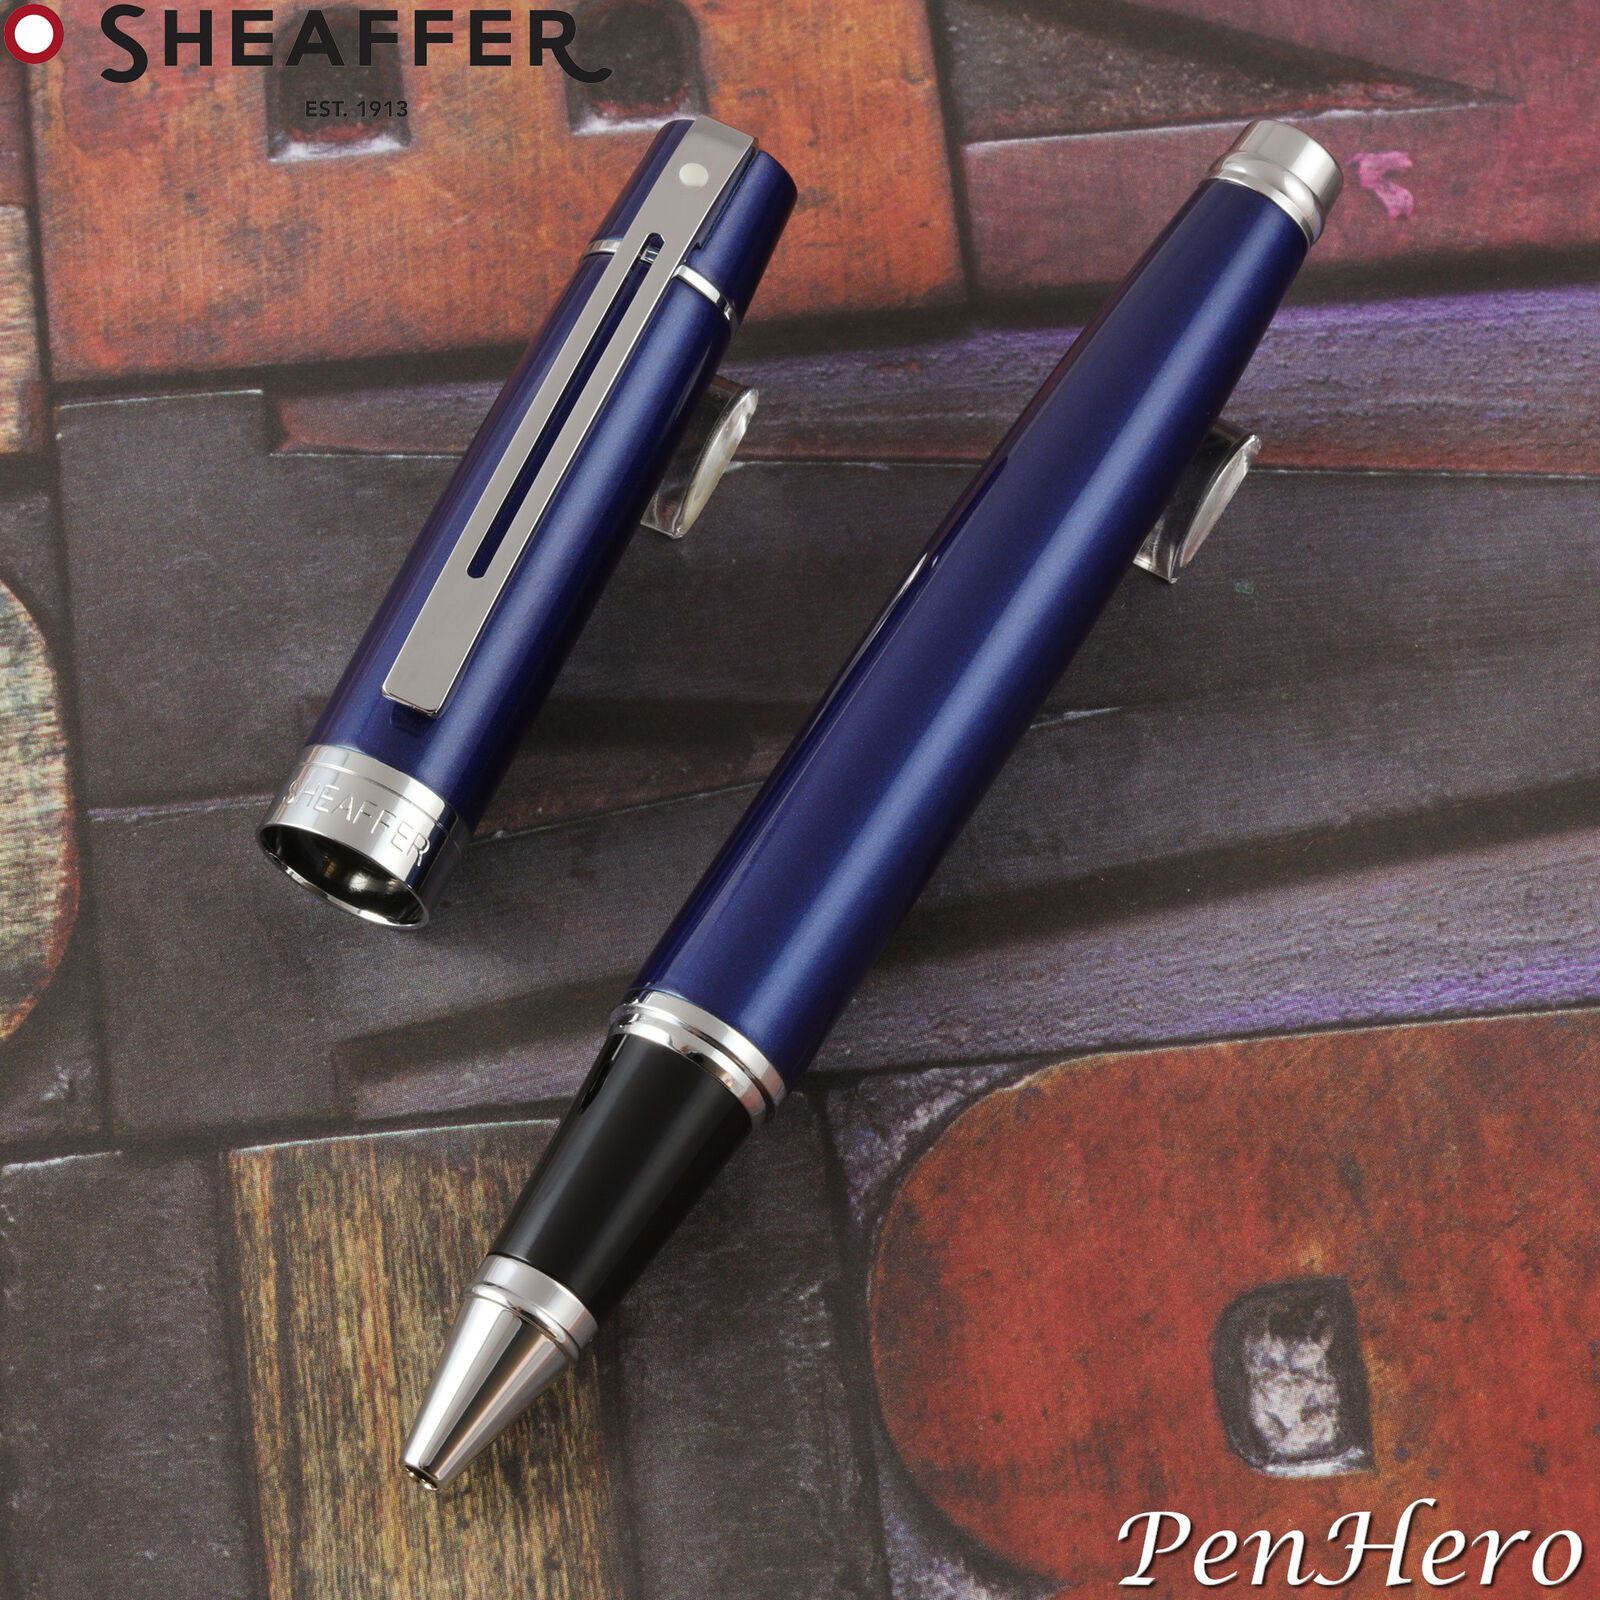 Sheaffer 300 Glossy Blue Lacquer Rollerball Pen